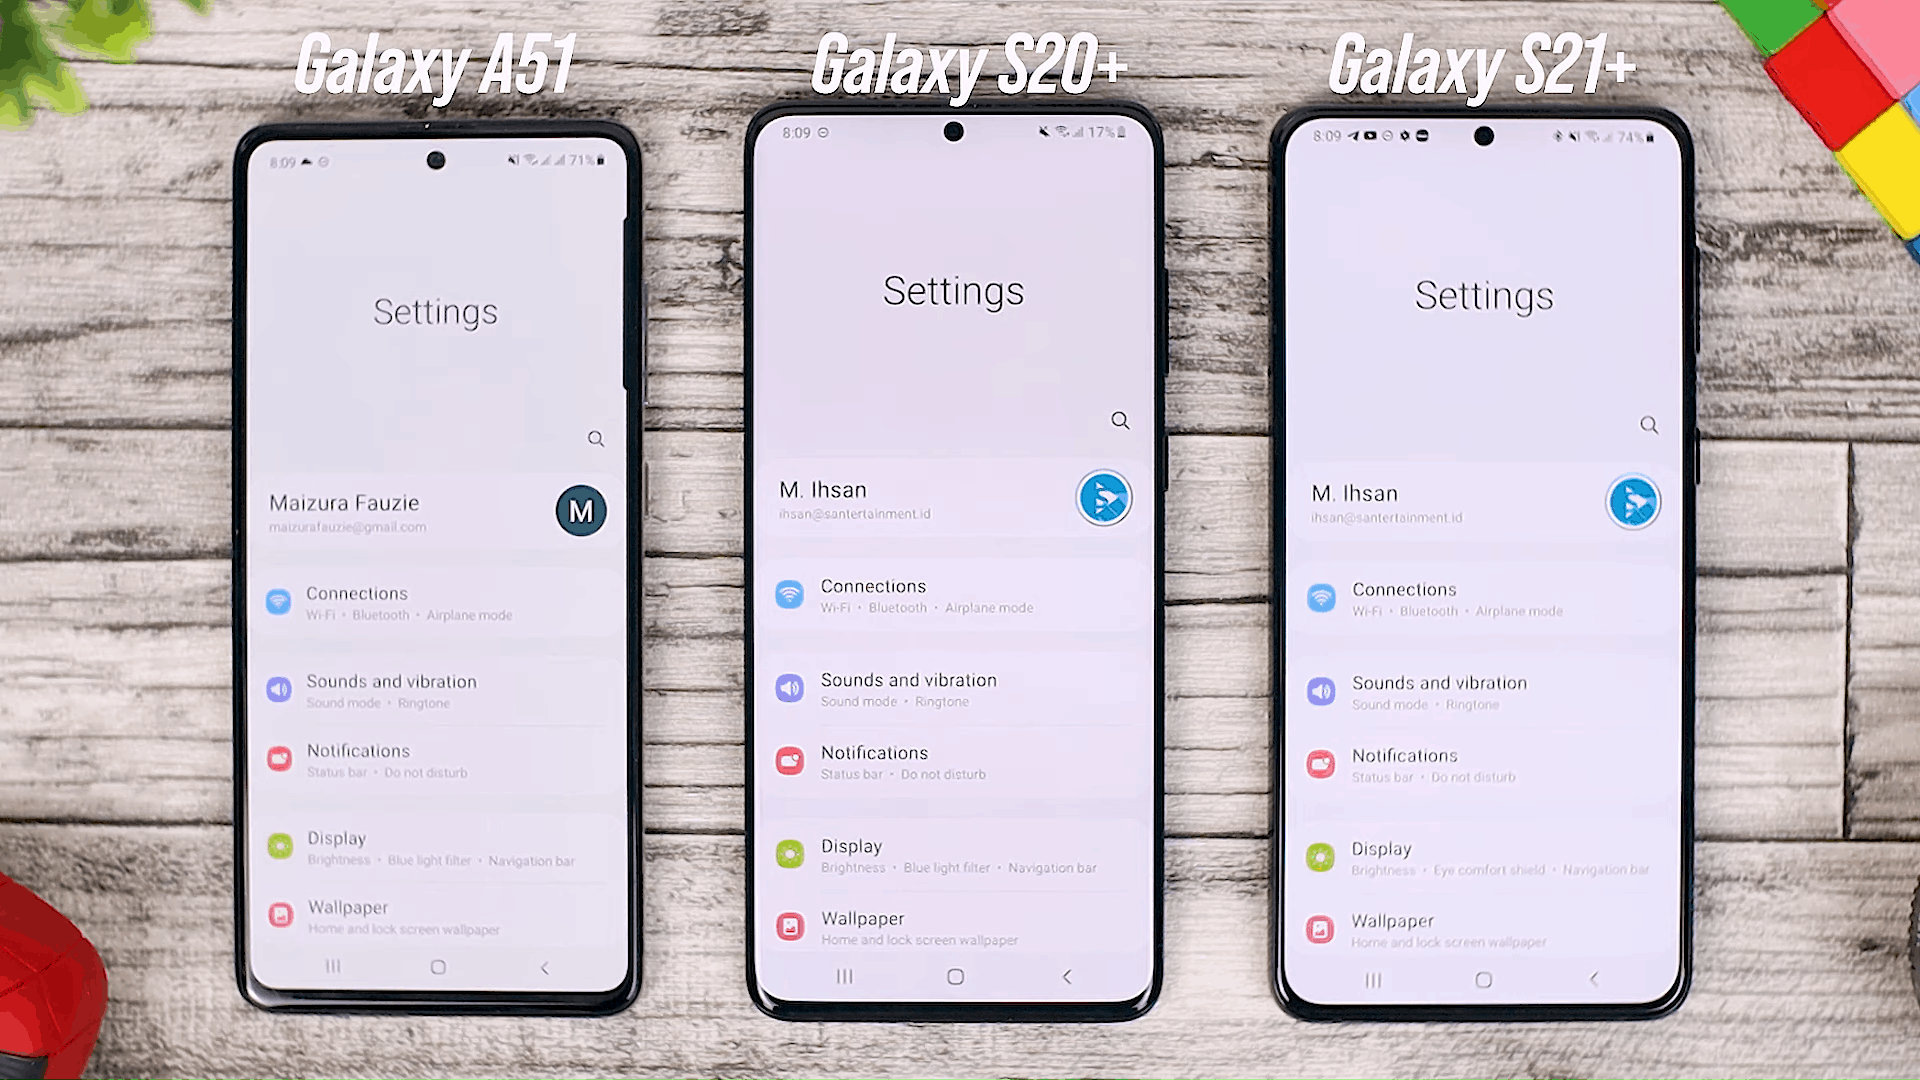 New Settings View - One UI 3.0 features of Samsung Galaxy A51 and its comparison with the Galaxy S20+ and One UI 3.1 on the Galaxy S21+